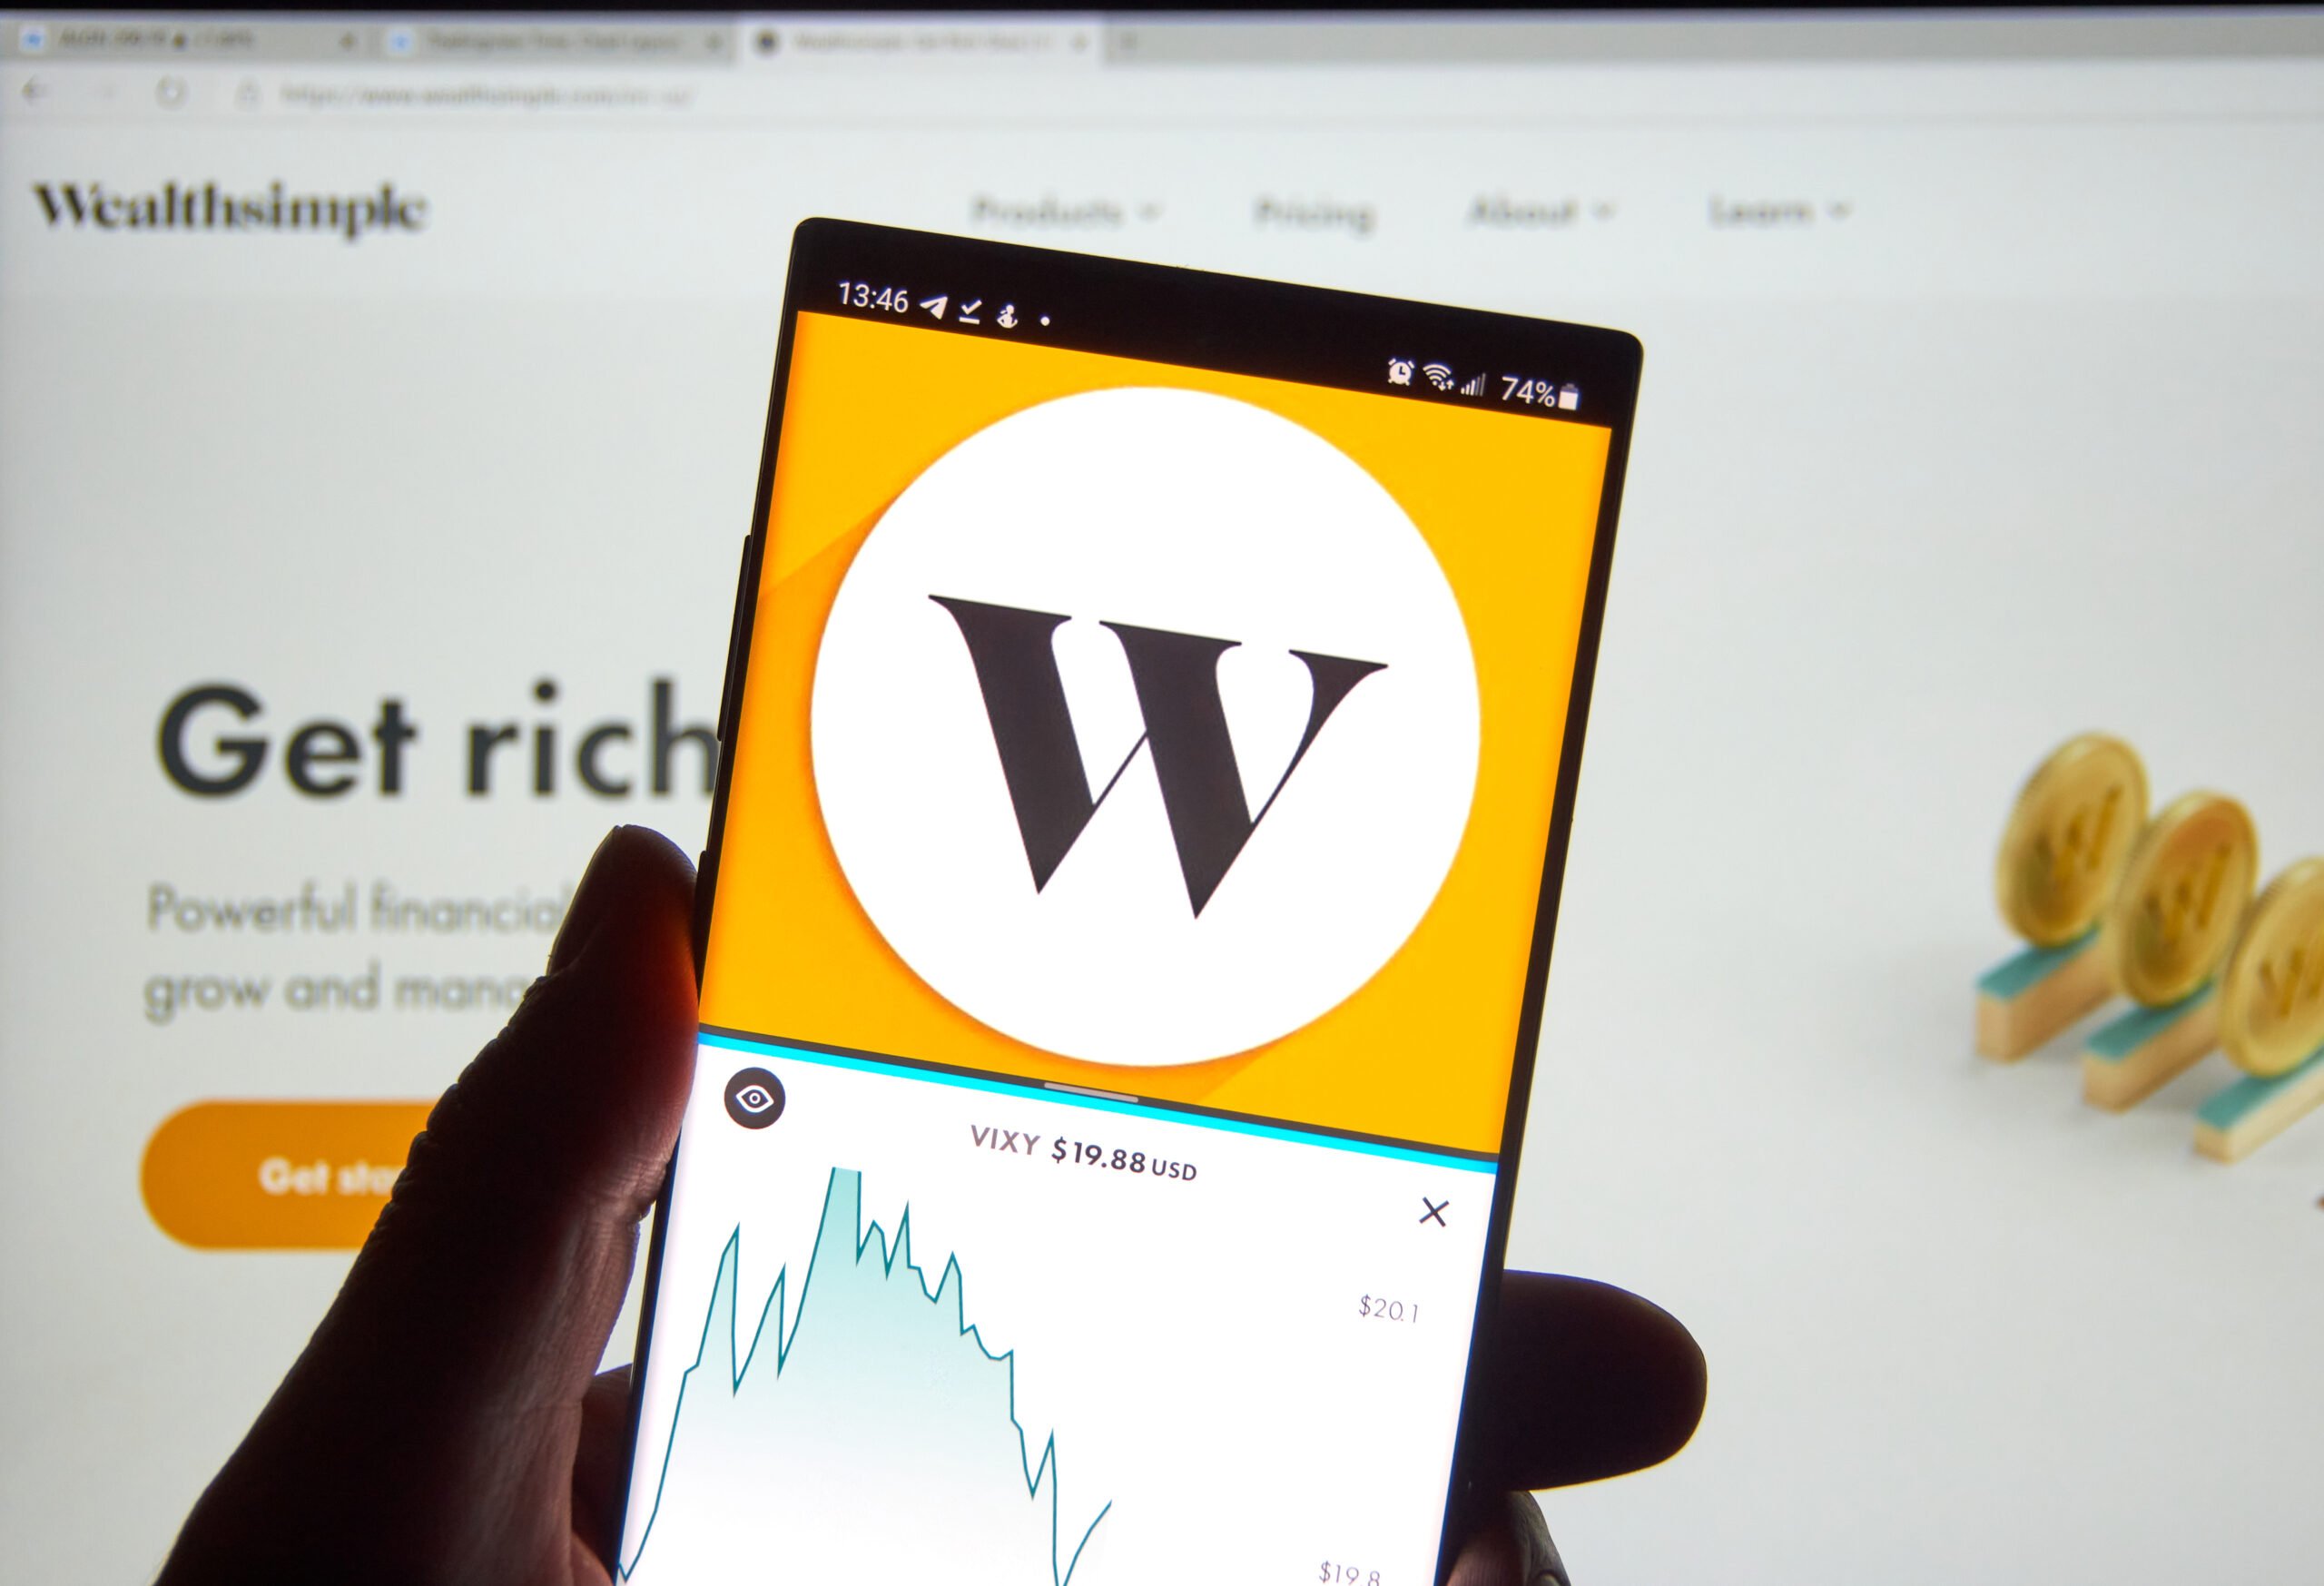 Which Investment Platform is Right for Me? Wealthsimple or Questrade?